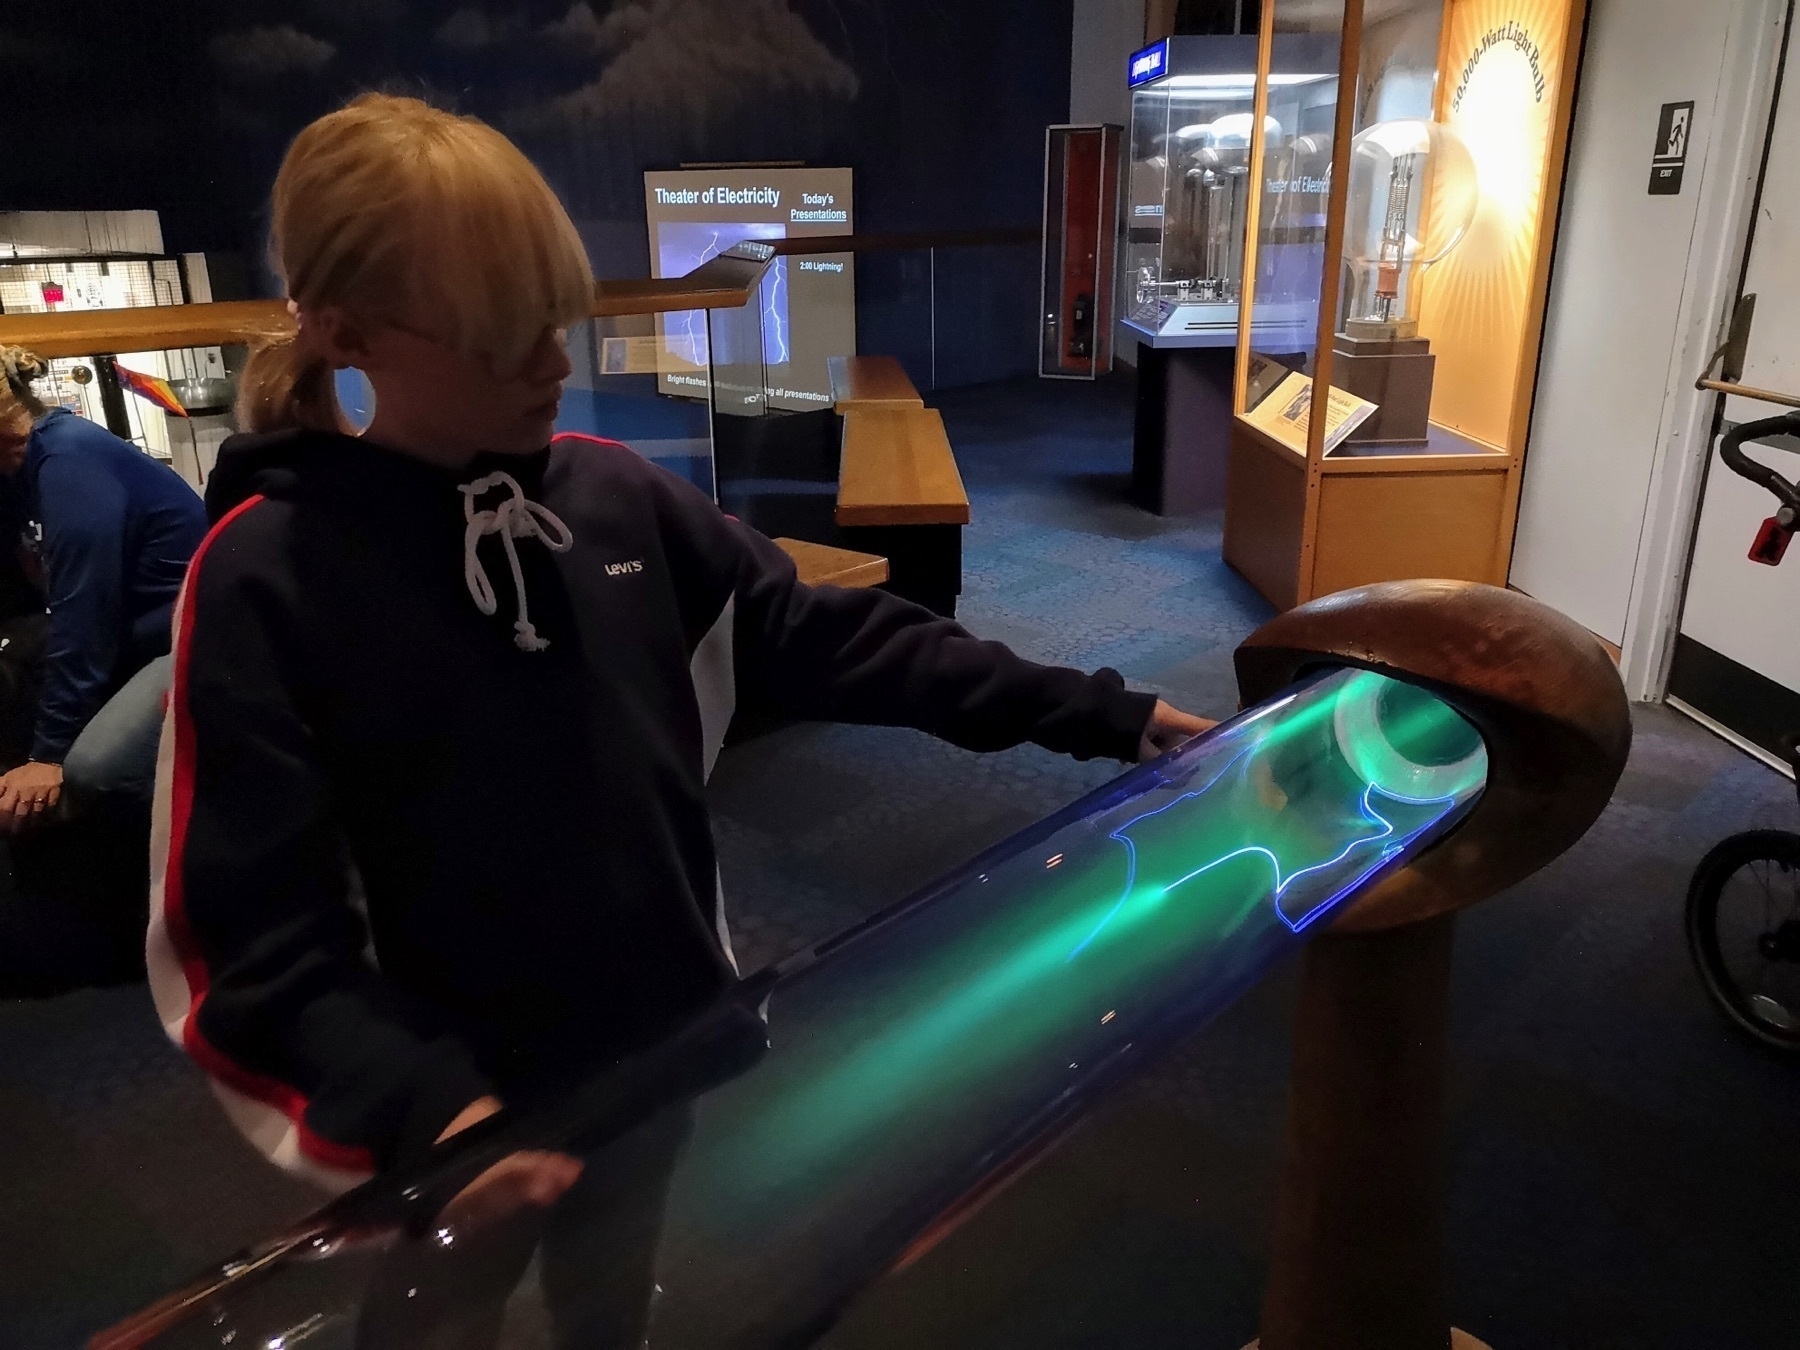 plasma tube, teenager touching it, “theater of electricity” signs on the background